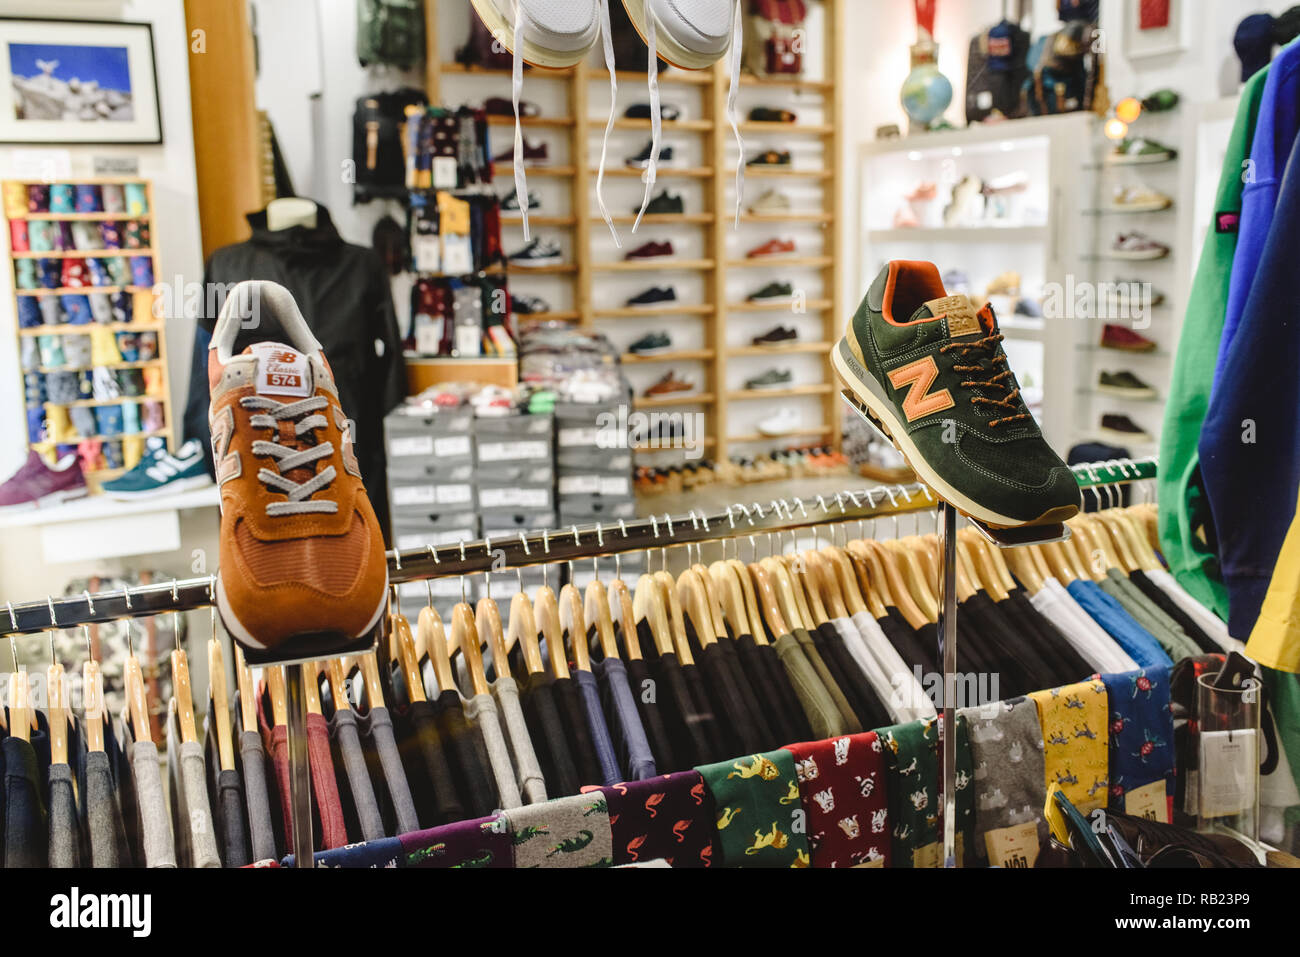 Valencia, Spain - January 2, 2019: New Balance sneakers shown in the shop  window of a sports and clothing store on Avenida Colon in Valencia, Spain  Stock Photo - Alamy